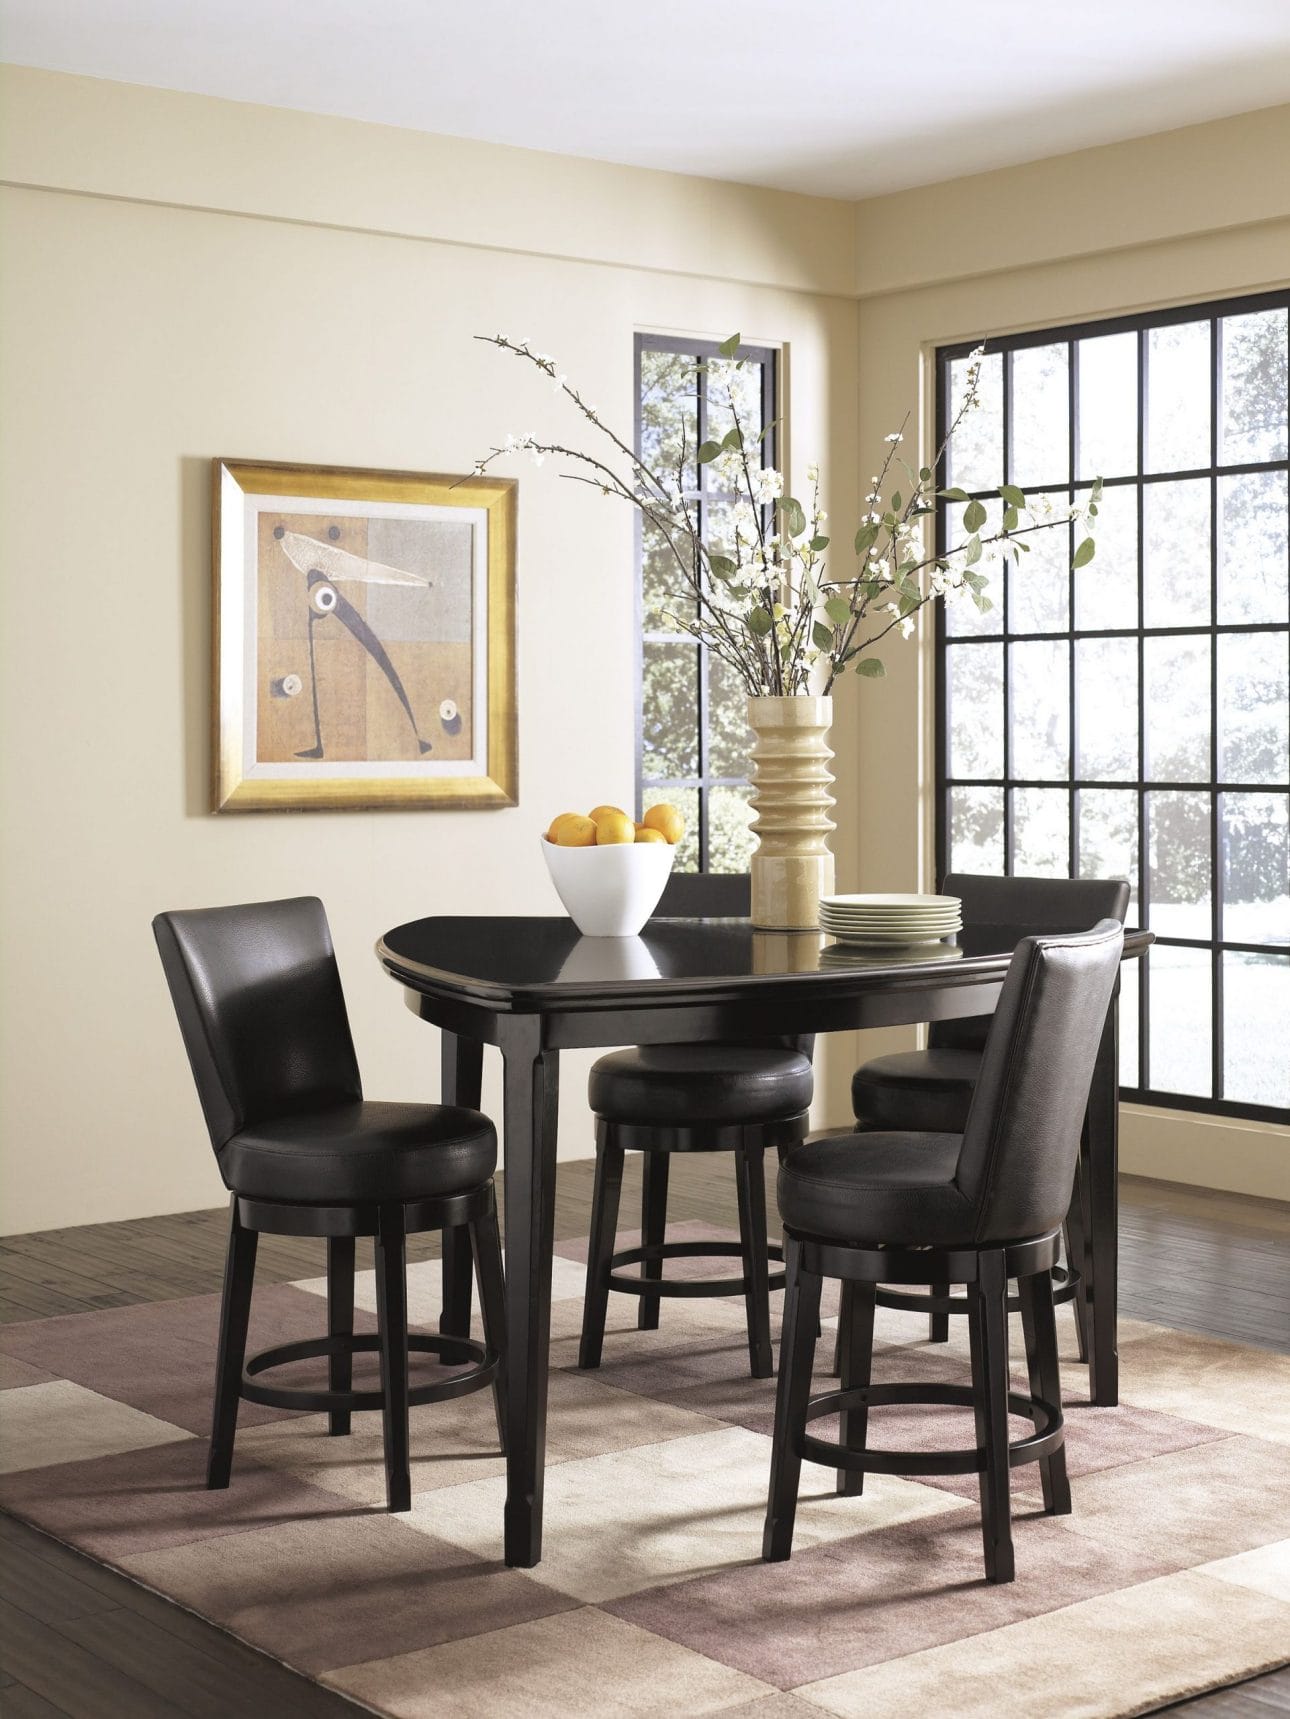 Black Triangle Table Ideas for Dining Room